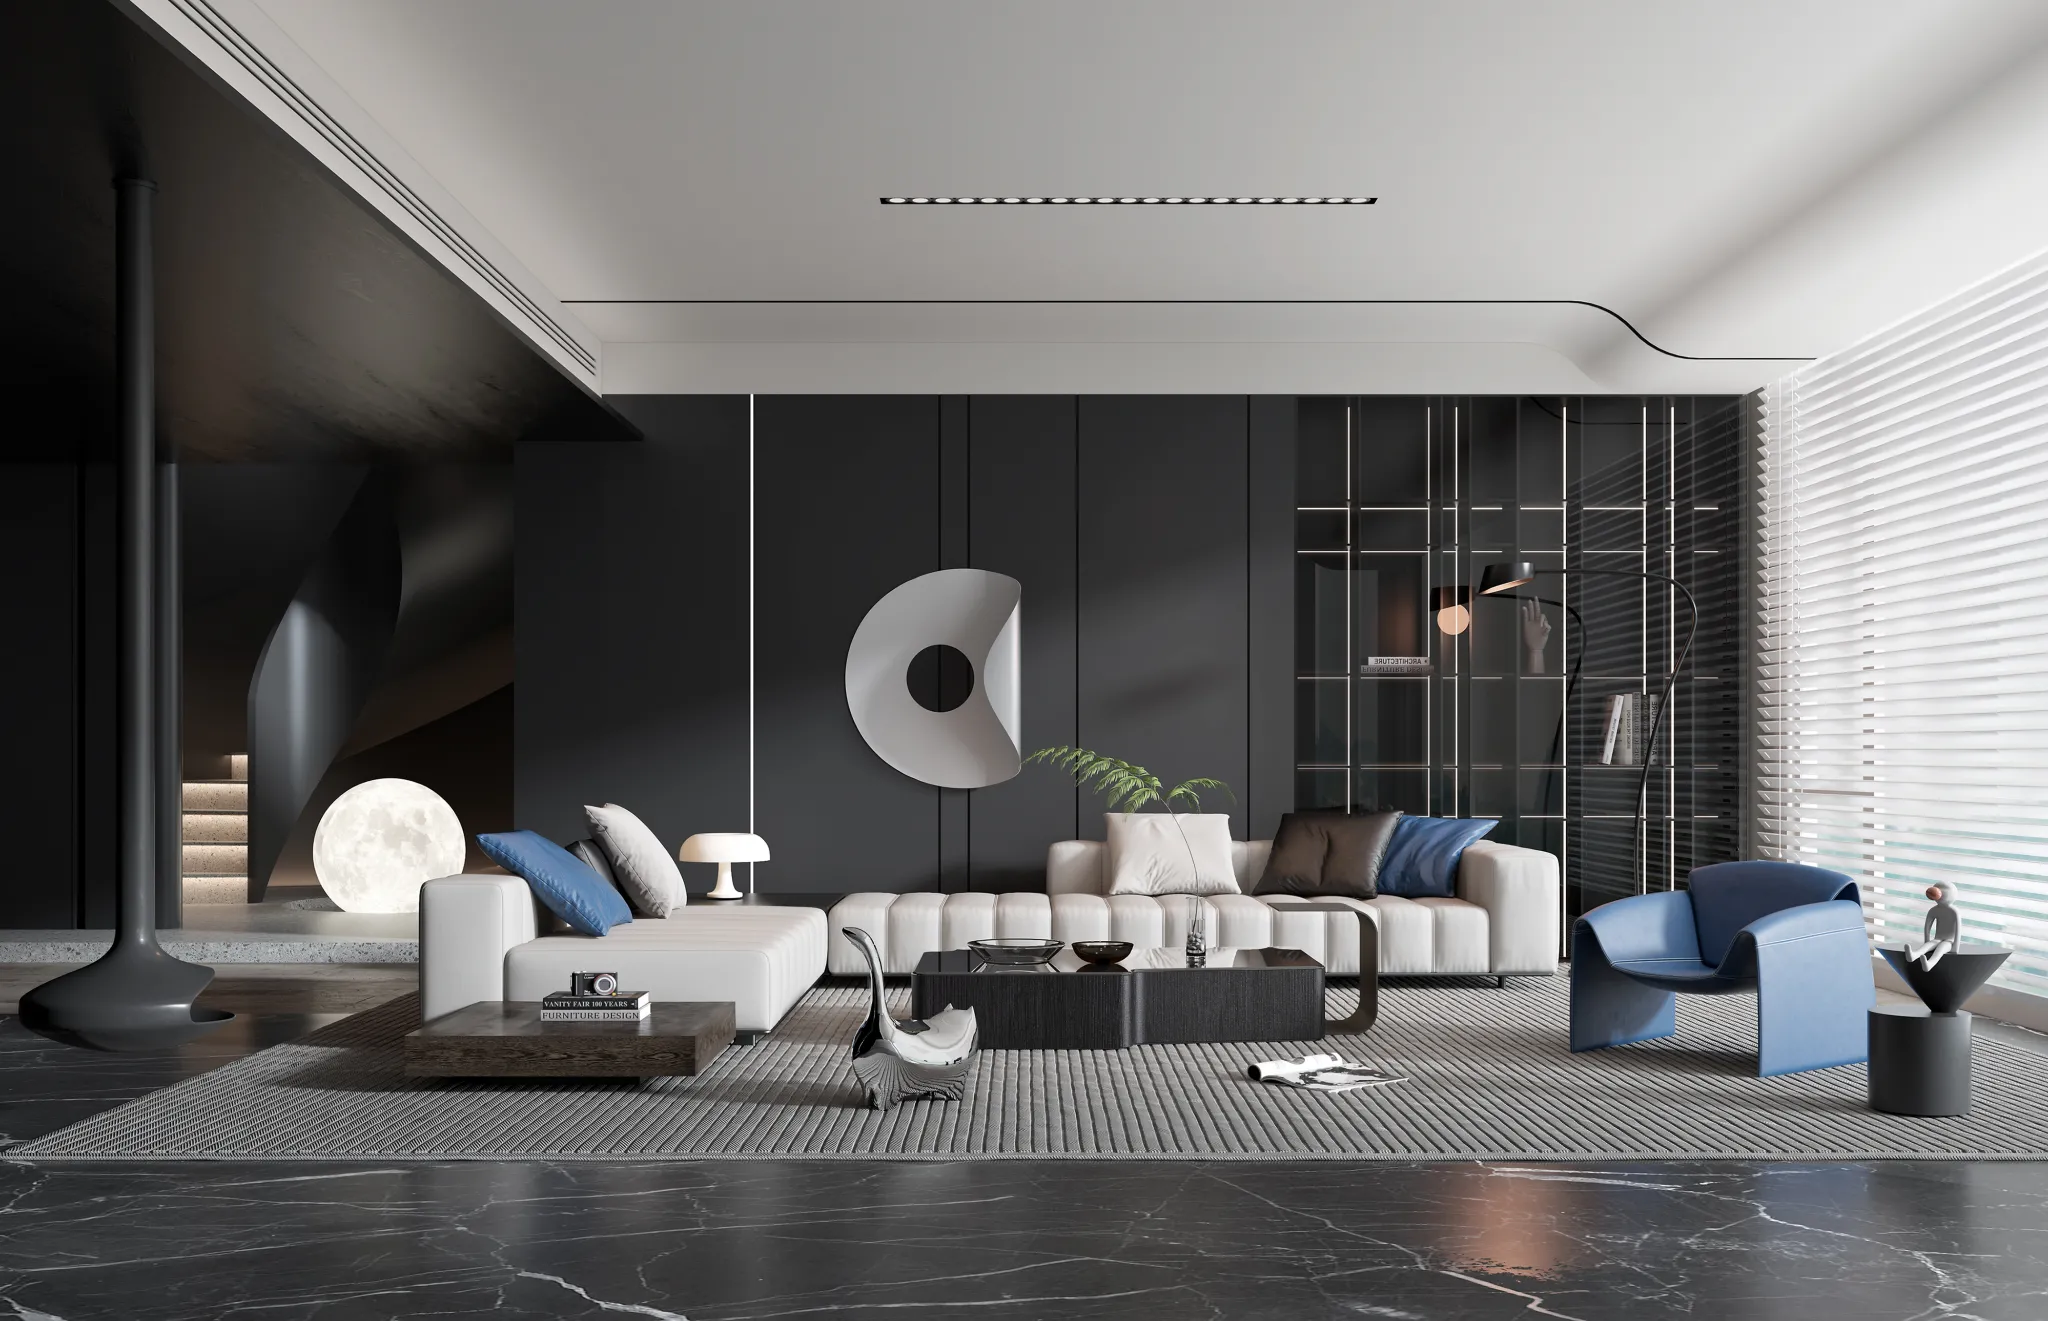 HOUSE SPACE 3D SCENES – LIVING ROOM – 0002